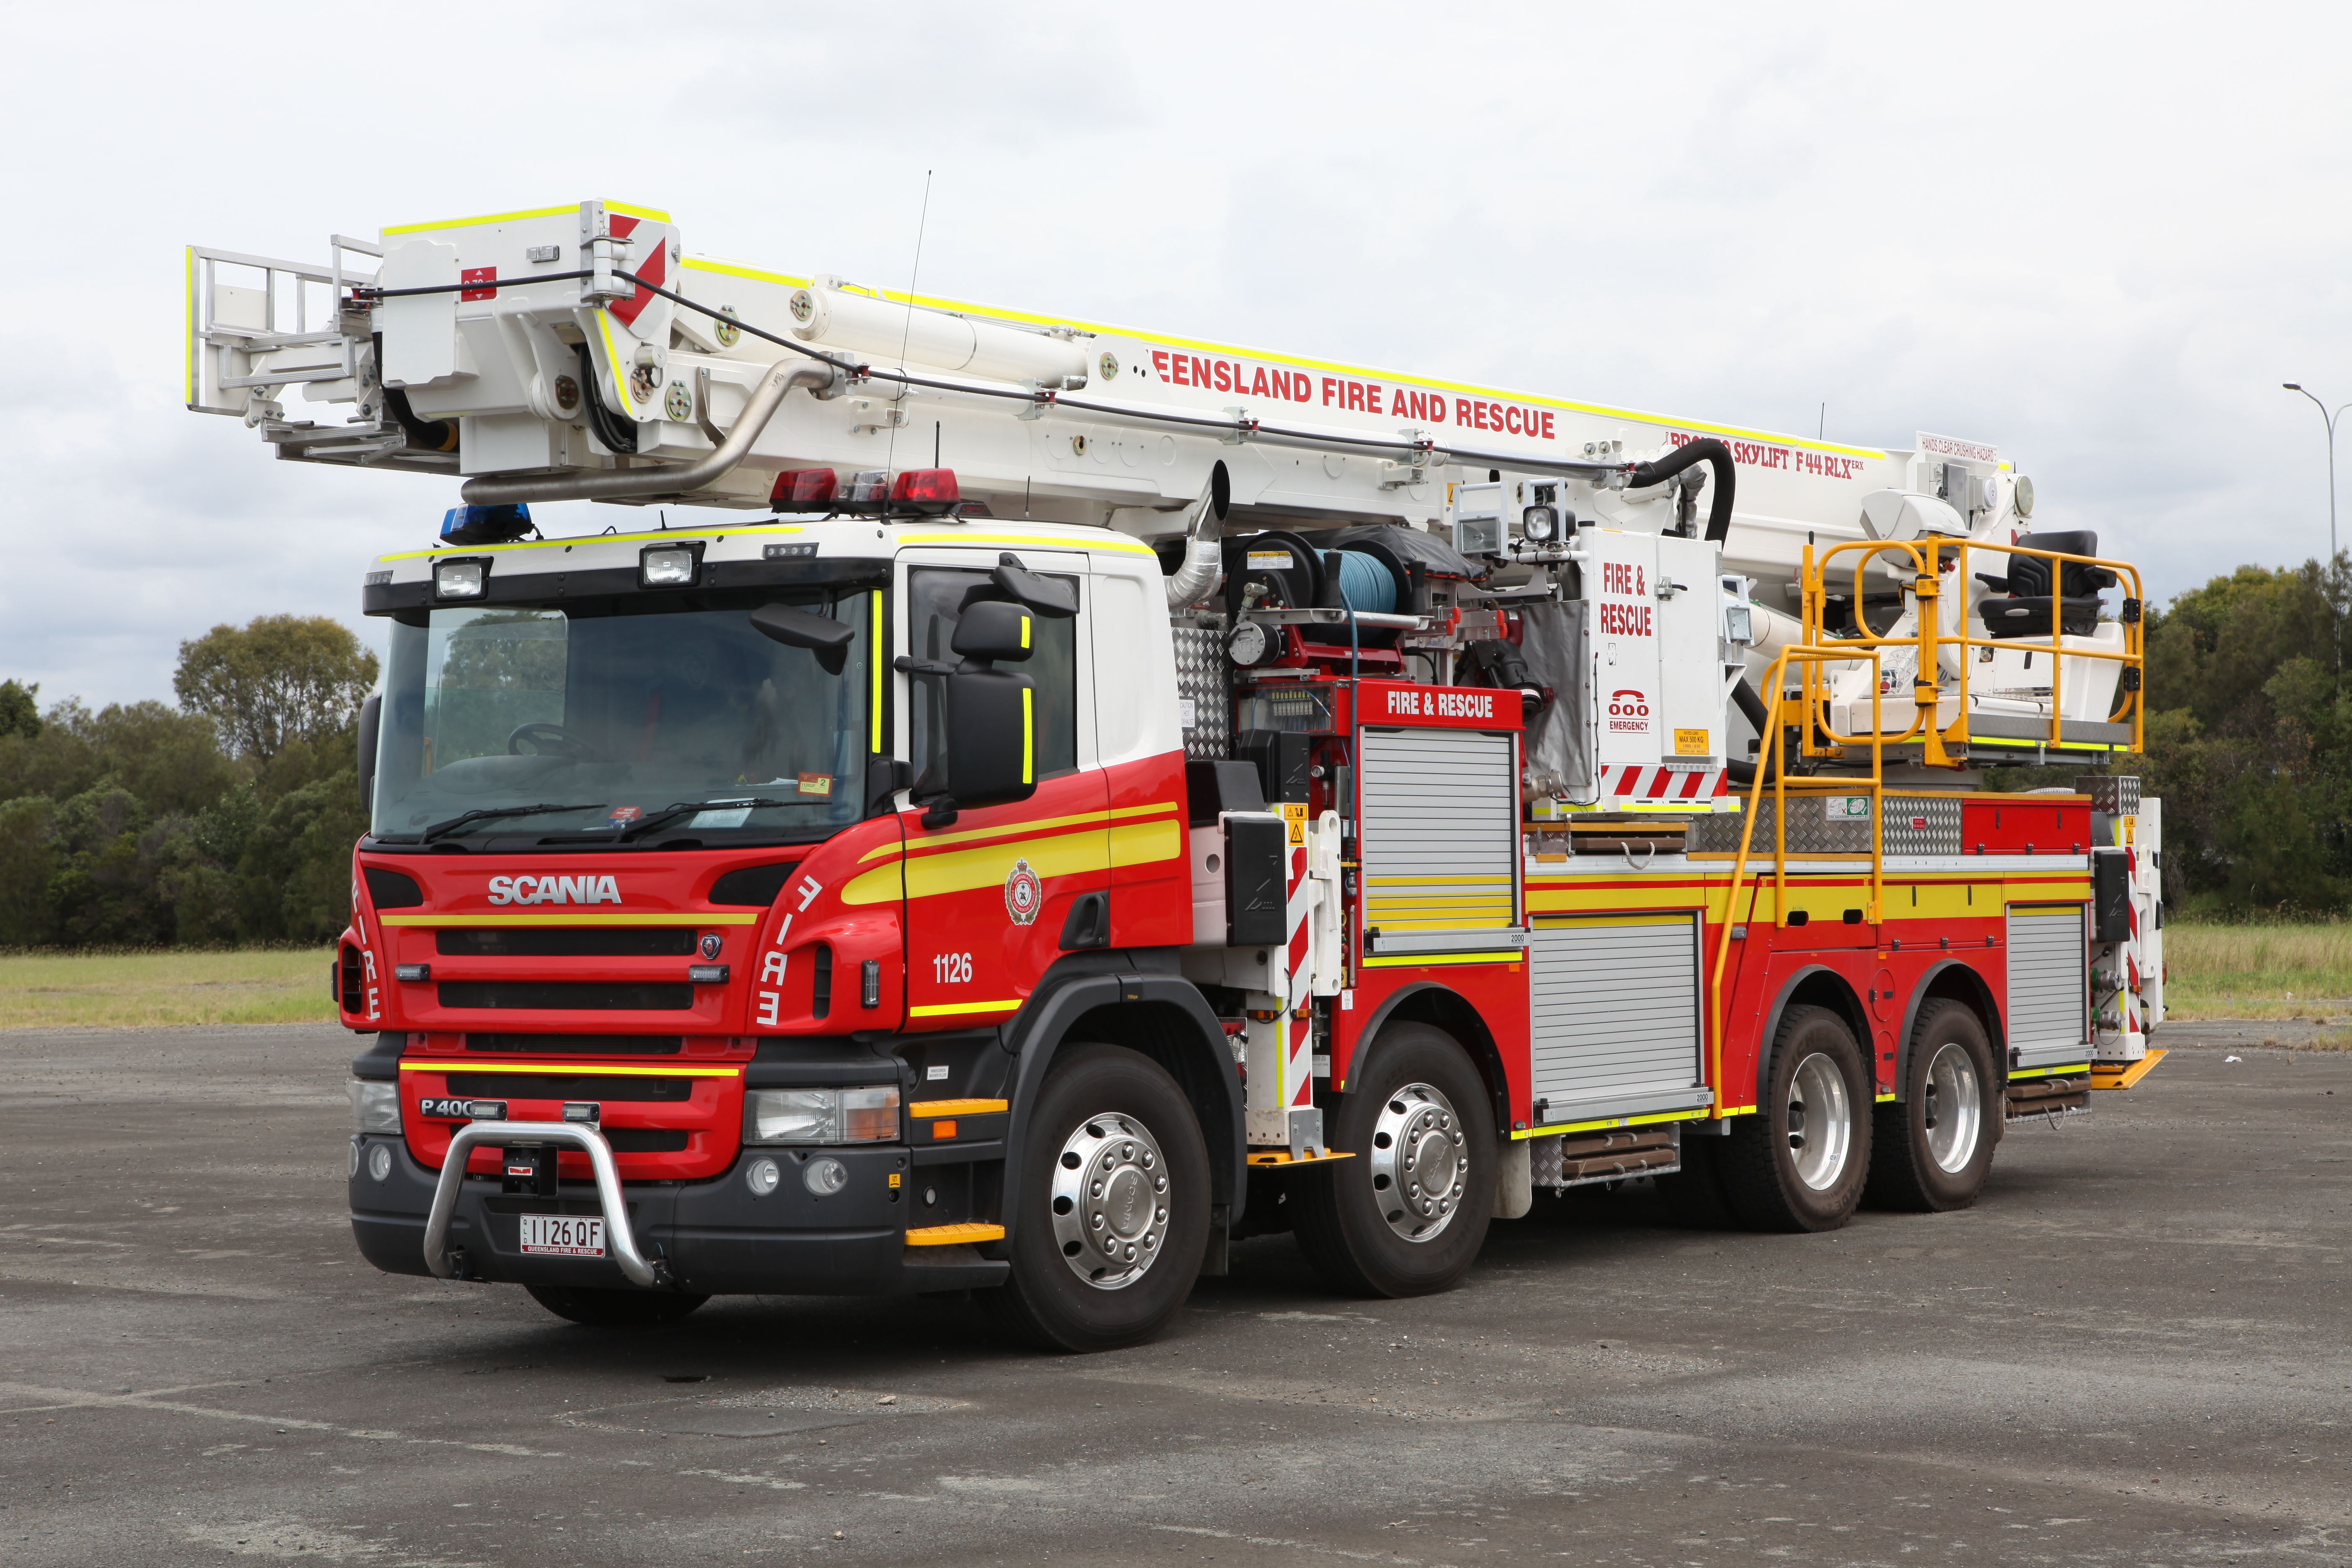 Fire Fighting and Rescue Vehicles